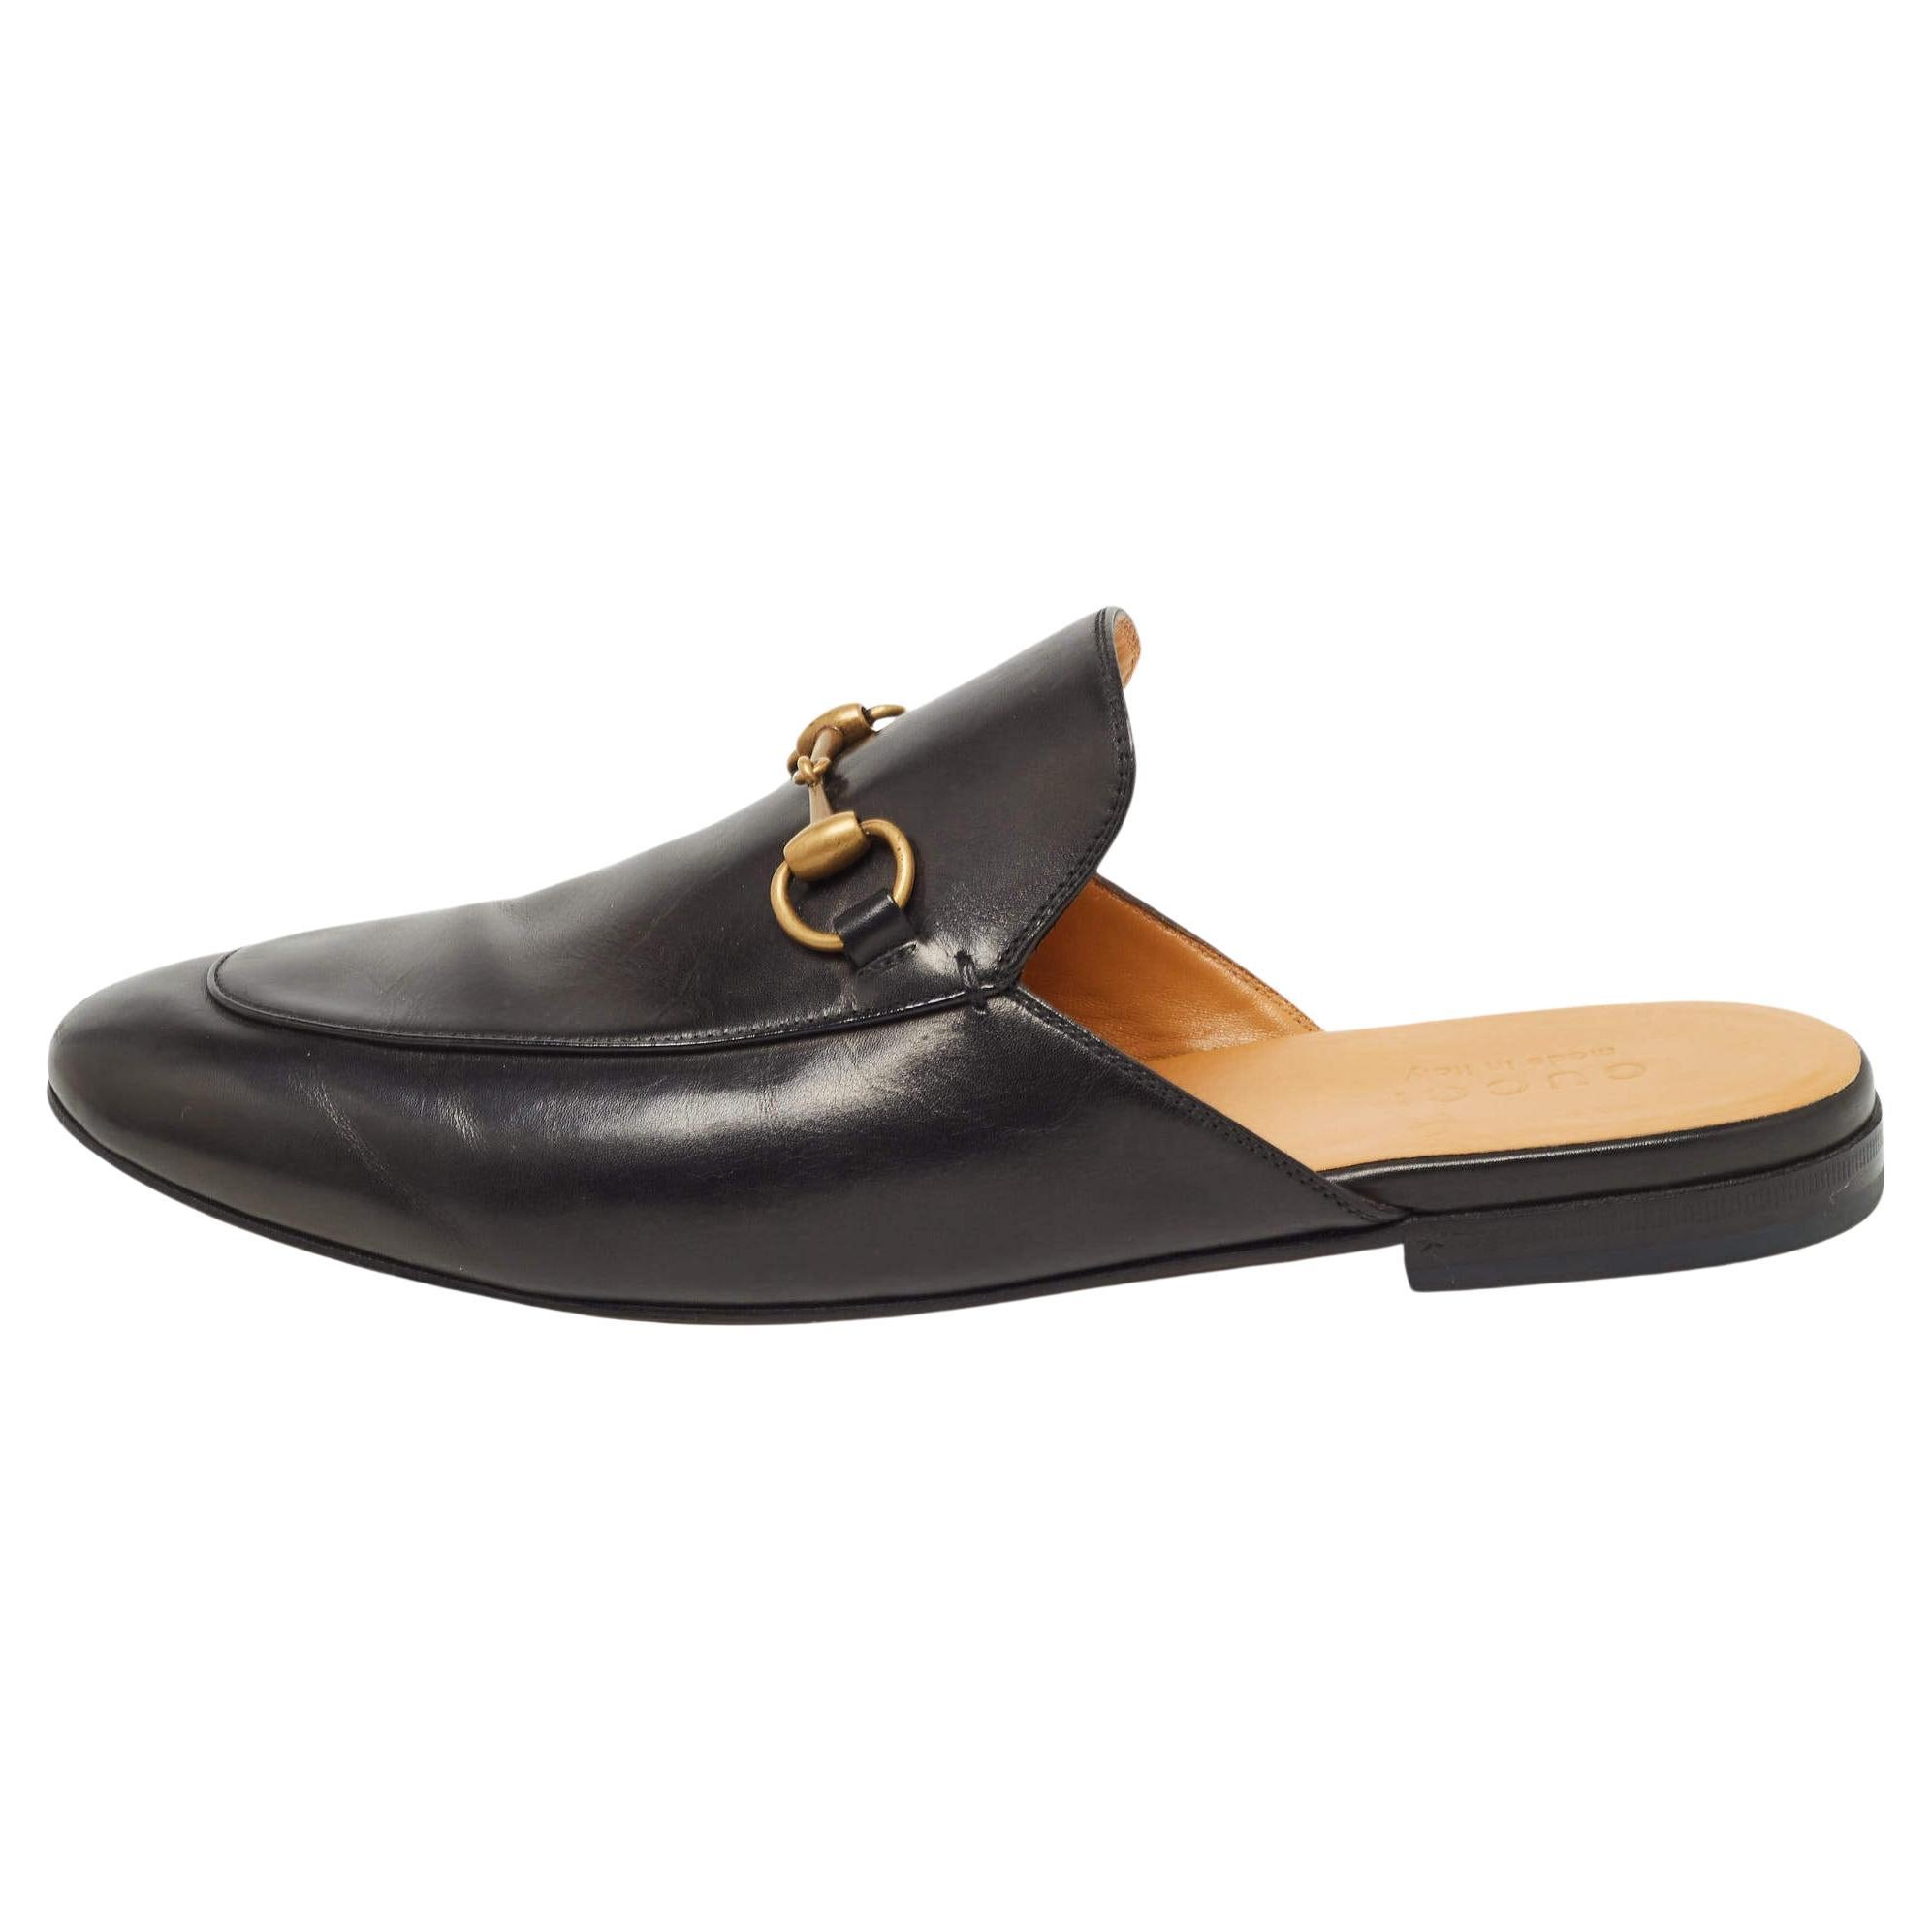 Gucci Black Leather Princetown Mules Size 43.5